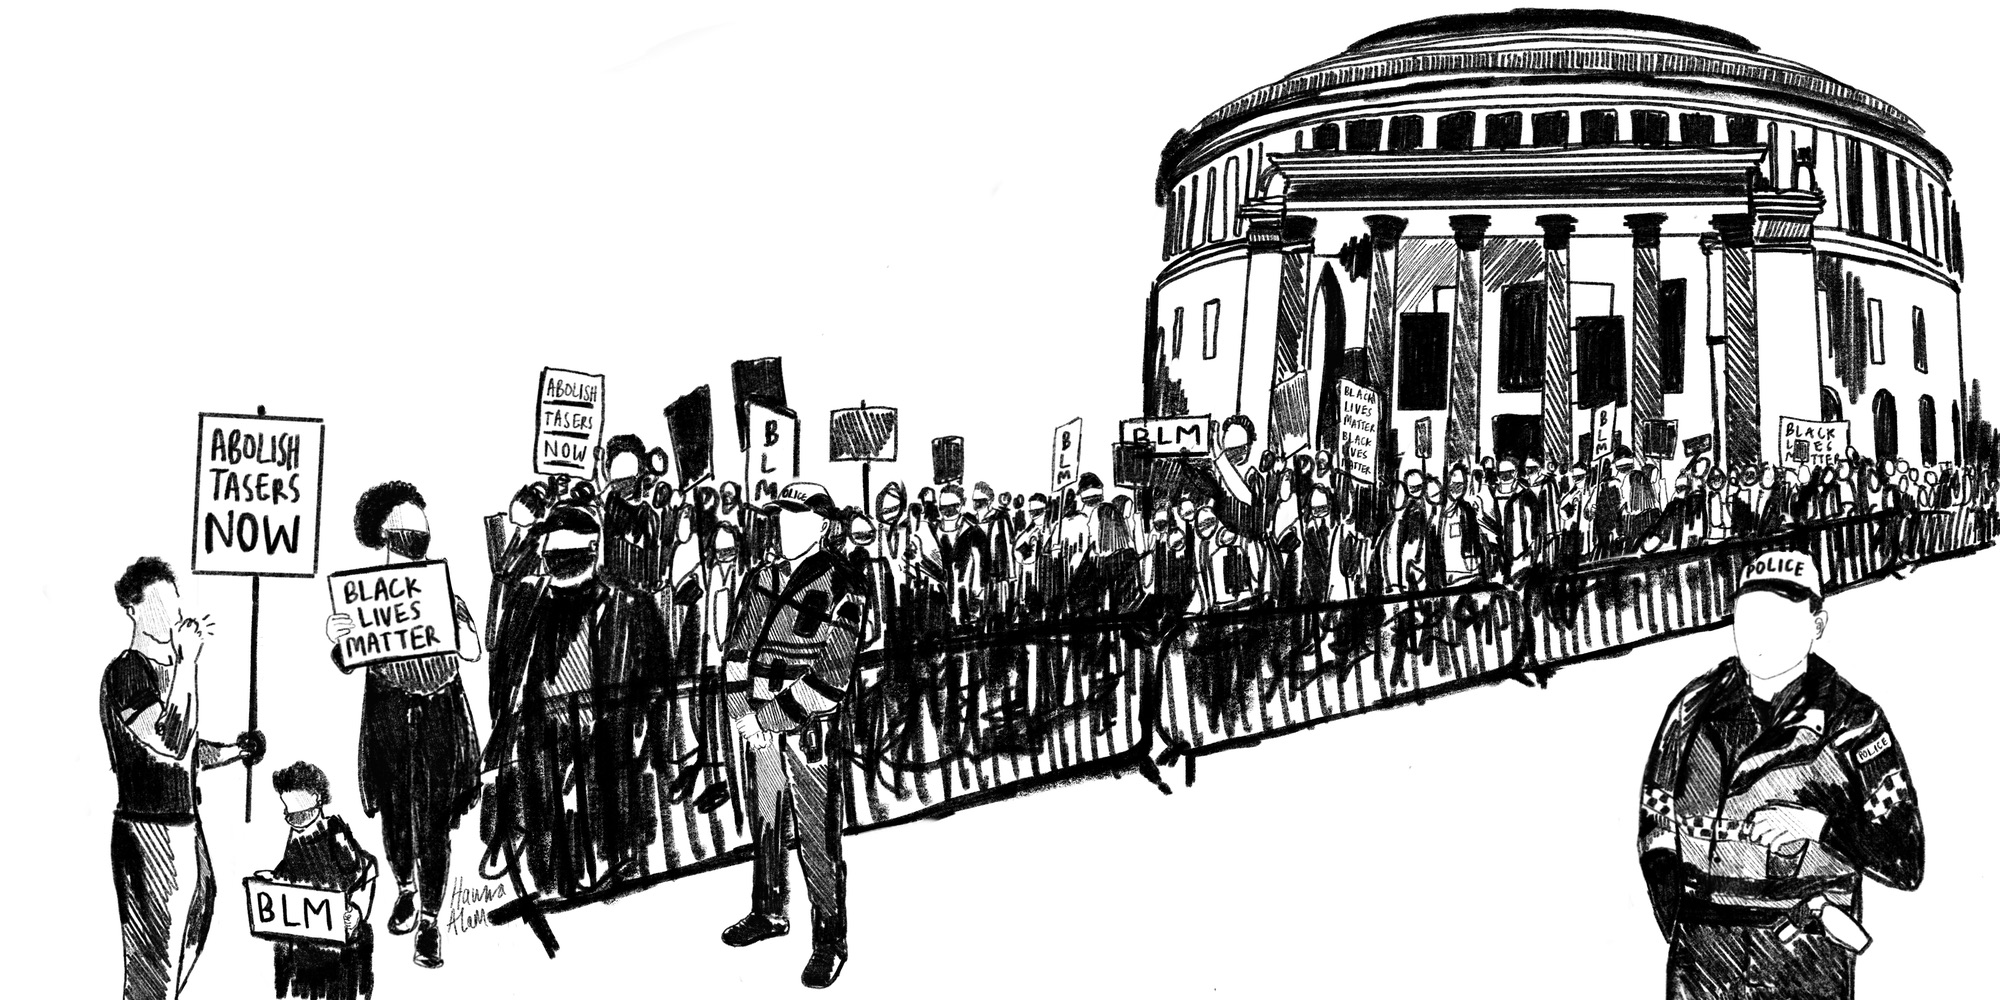 A black and white illustration of a protest held in front of a public building (Manchester Central Library pictured, but this could be any public building). Members of the public are holding signs, including signs reading ‘Abolish Tasers Now’ and ‘Black Lives Matter’. In front of the fence a police officer stands with his arms held in front of them, a Taser visible on their person.